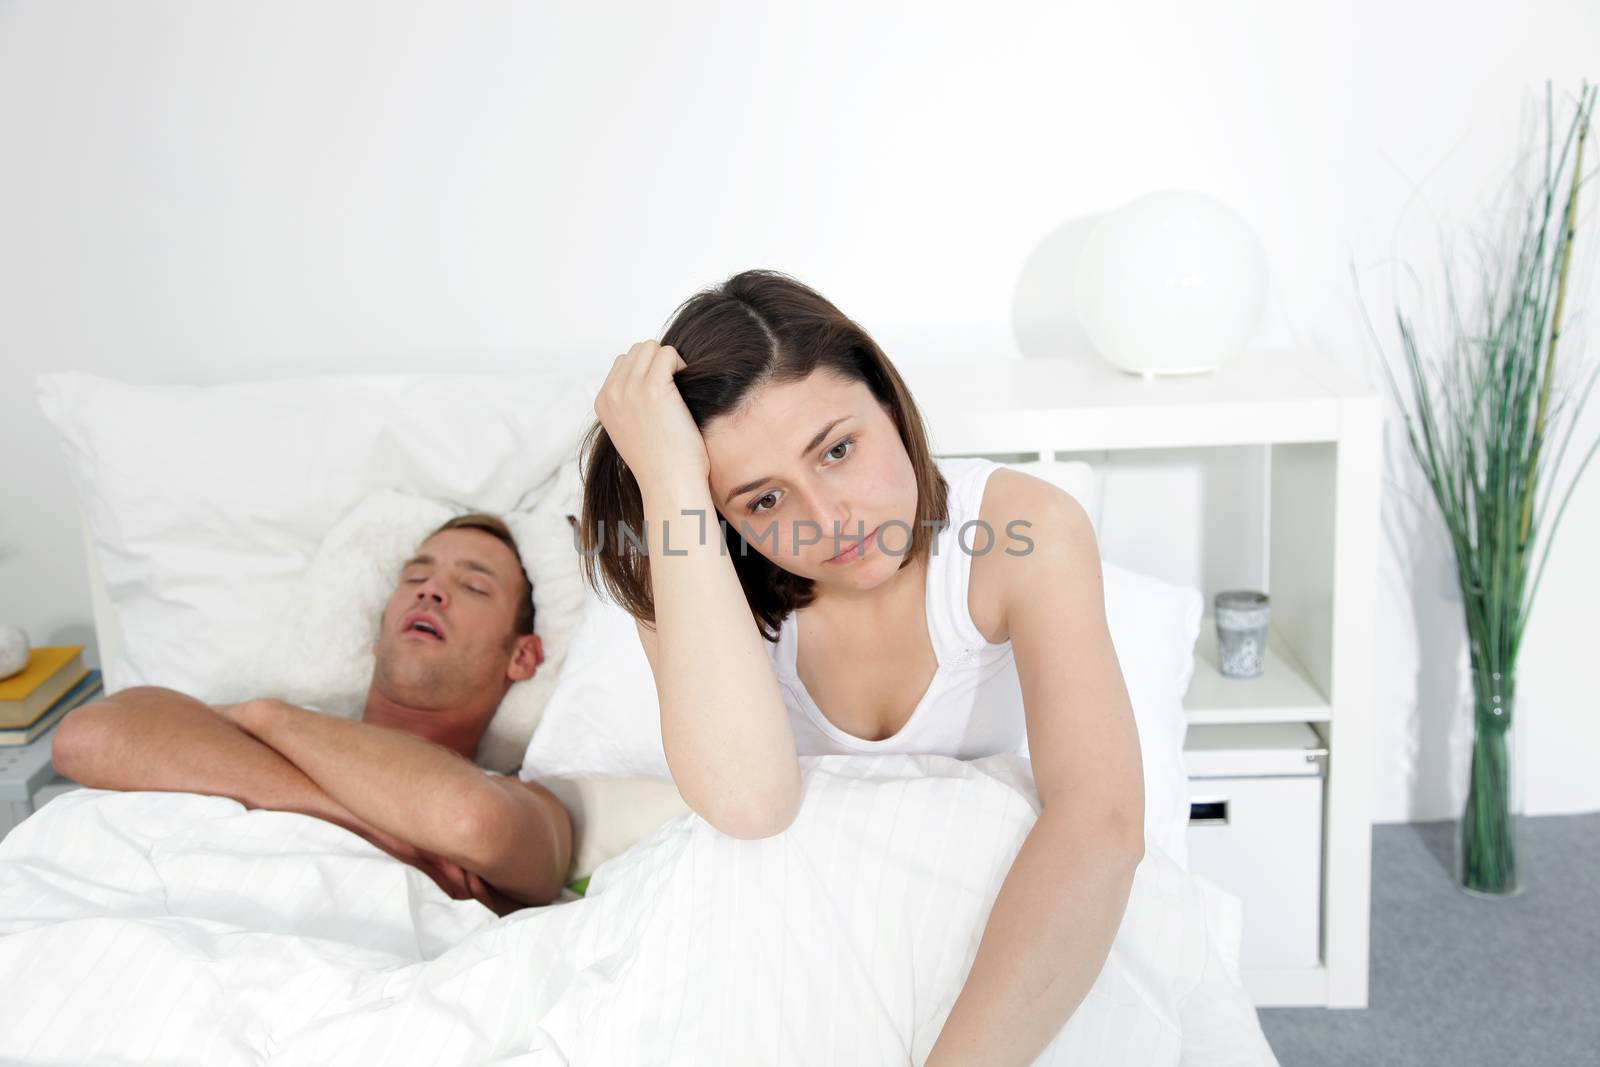 Incompatibility in bed with a husbands loud snores preventing his wife from getting any sleep and rest